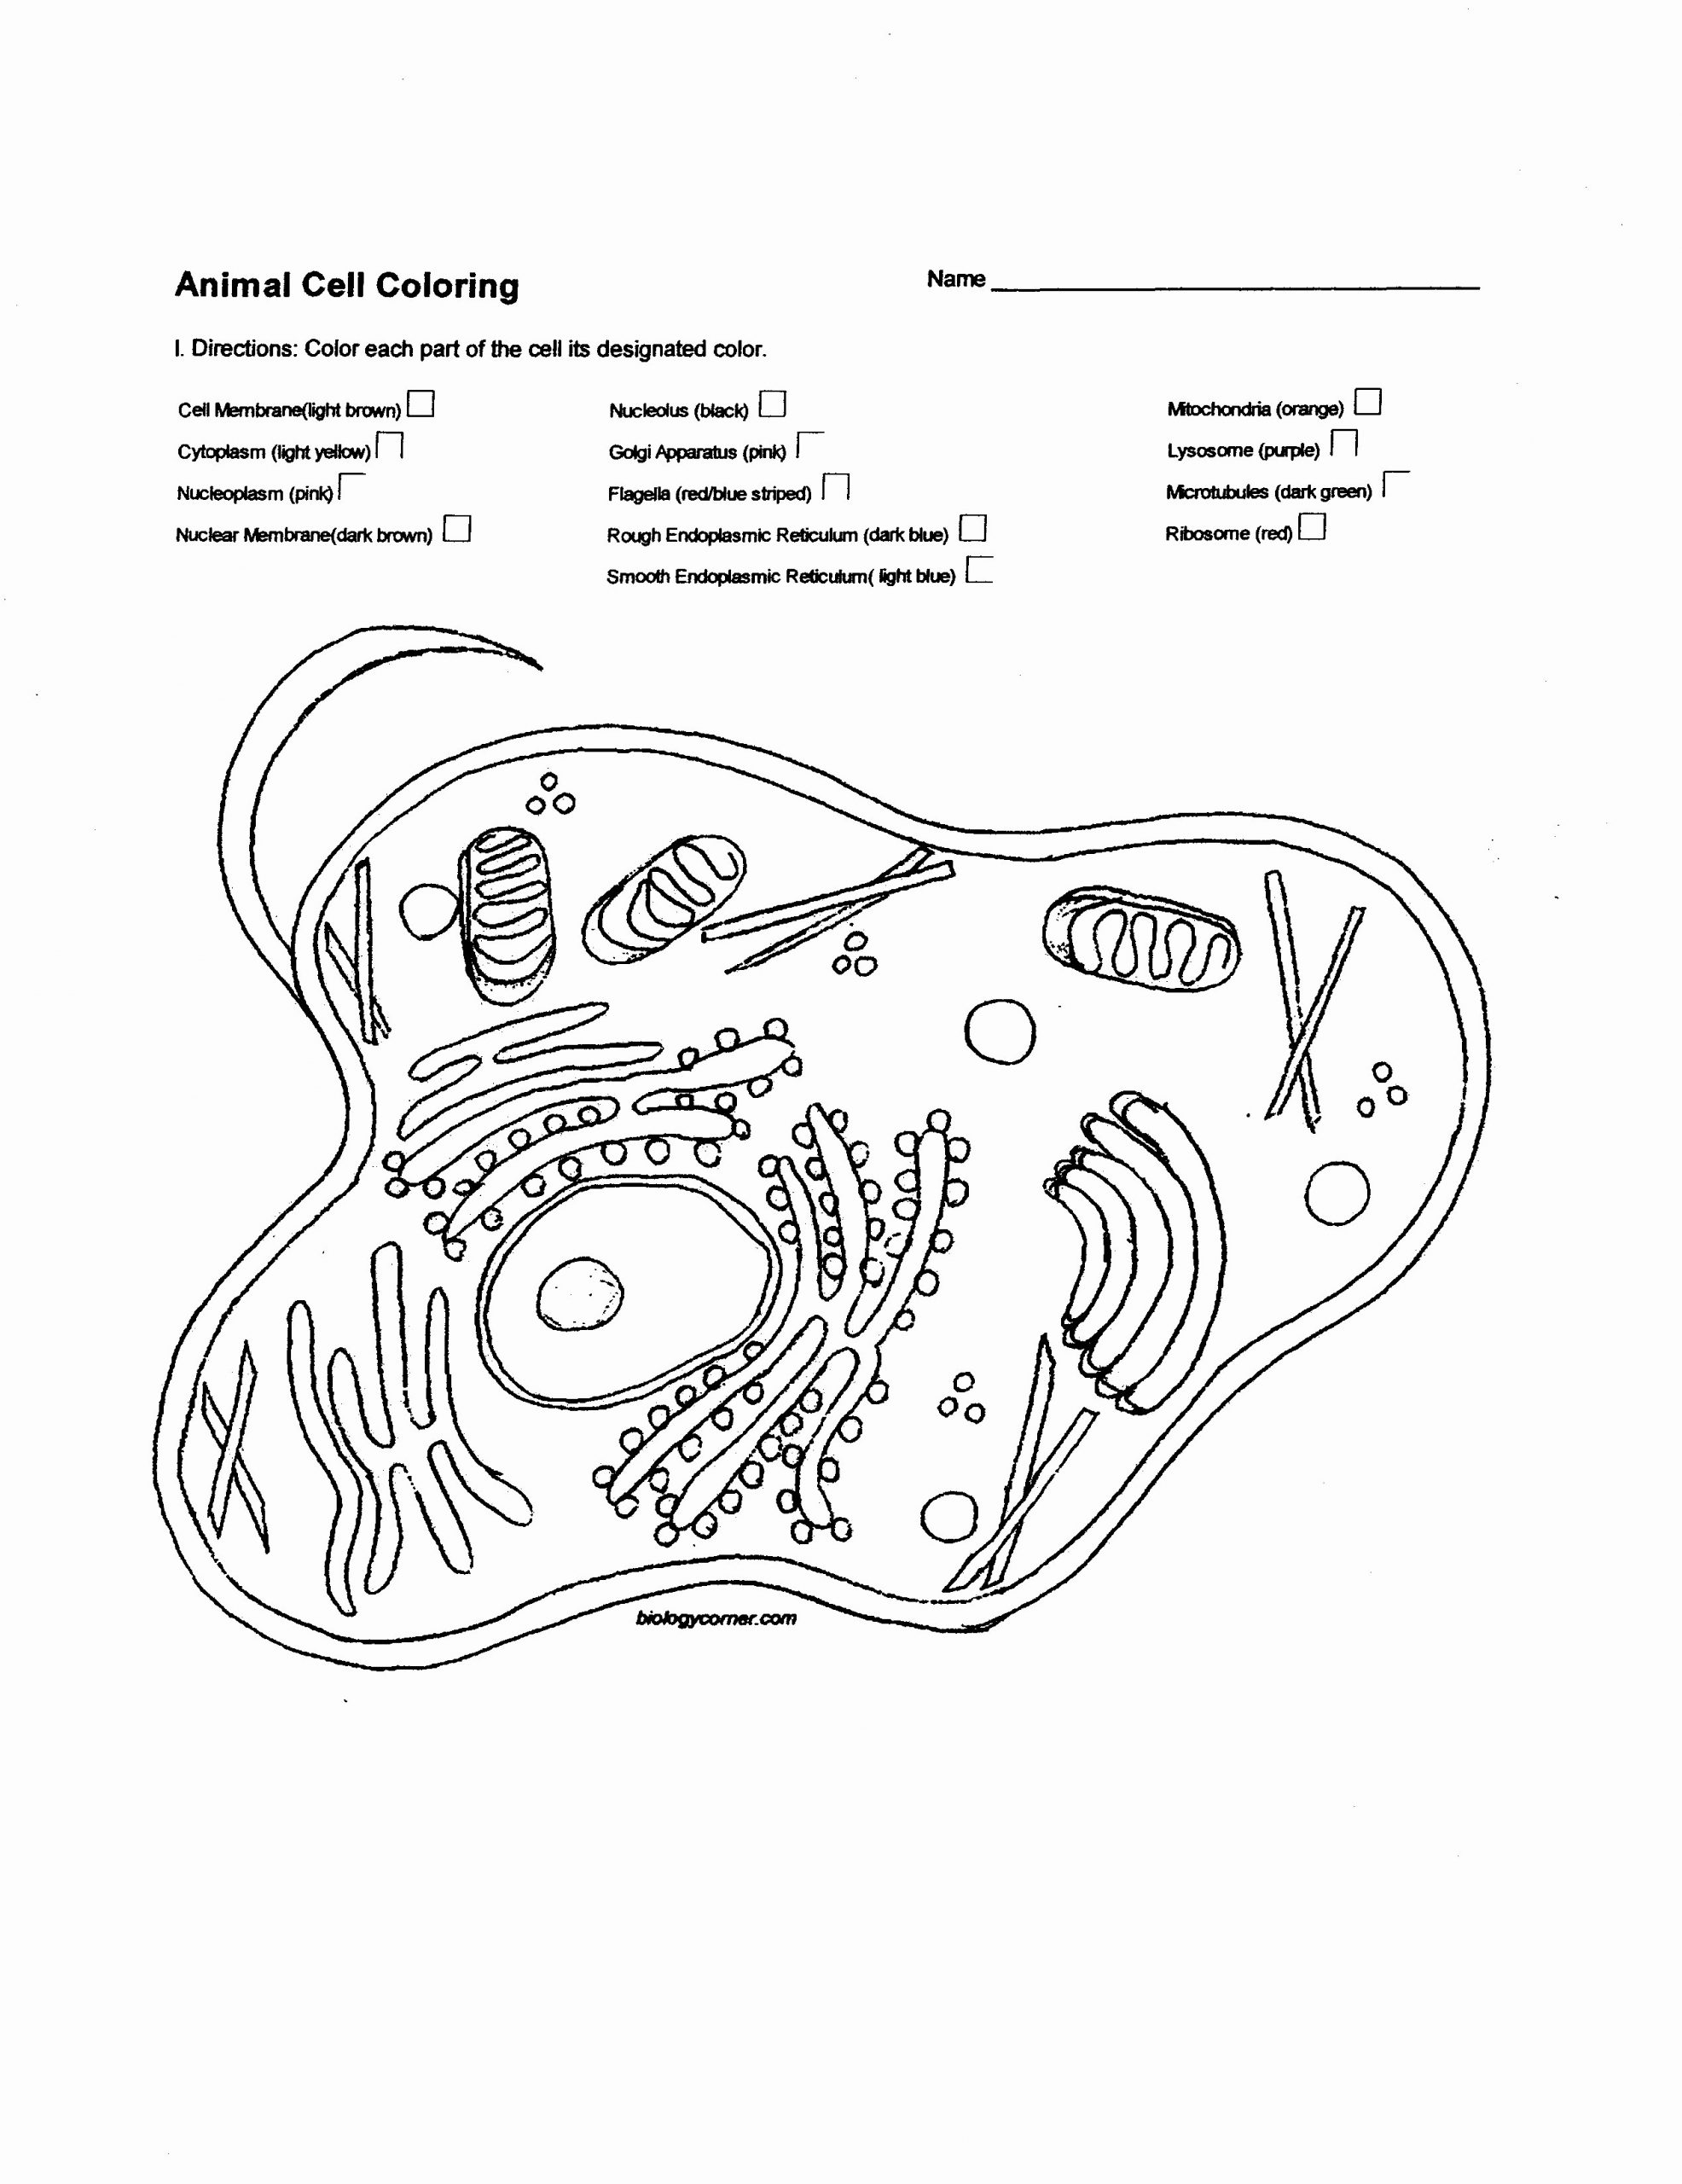 Cell Membrane Images Worksheet Answers Cell Membrane Coloring Worksheet Promotiontablecovers